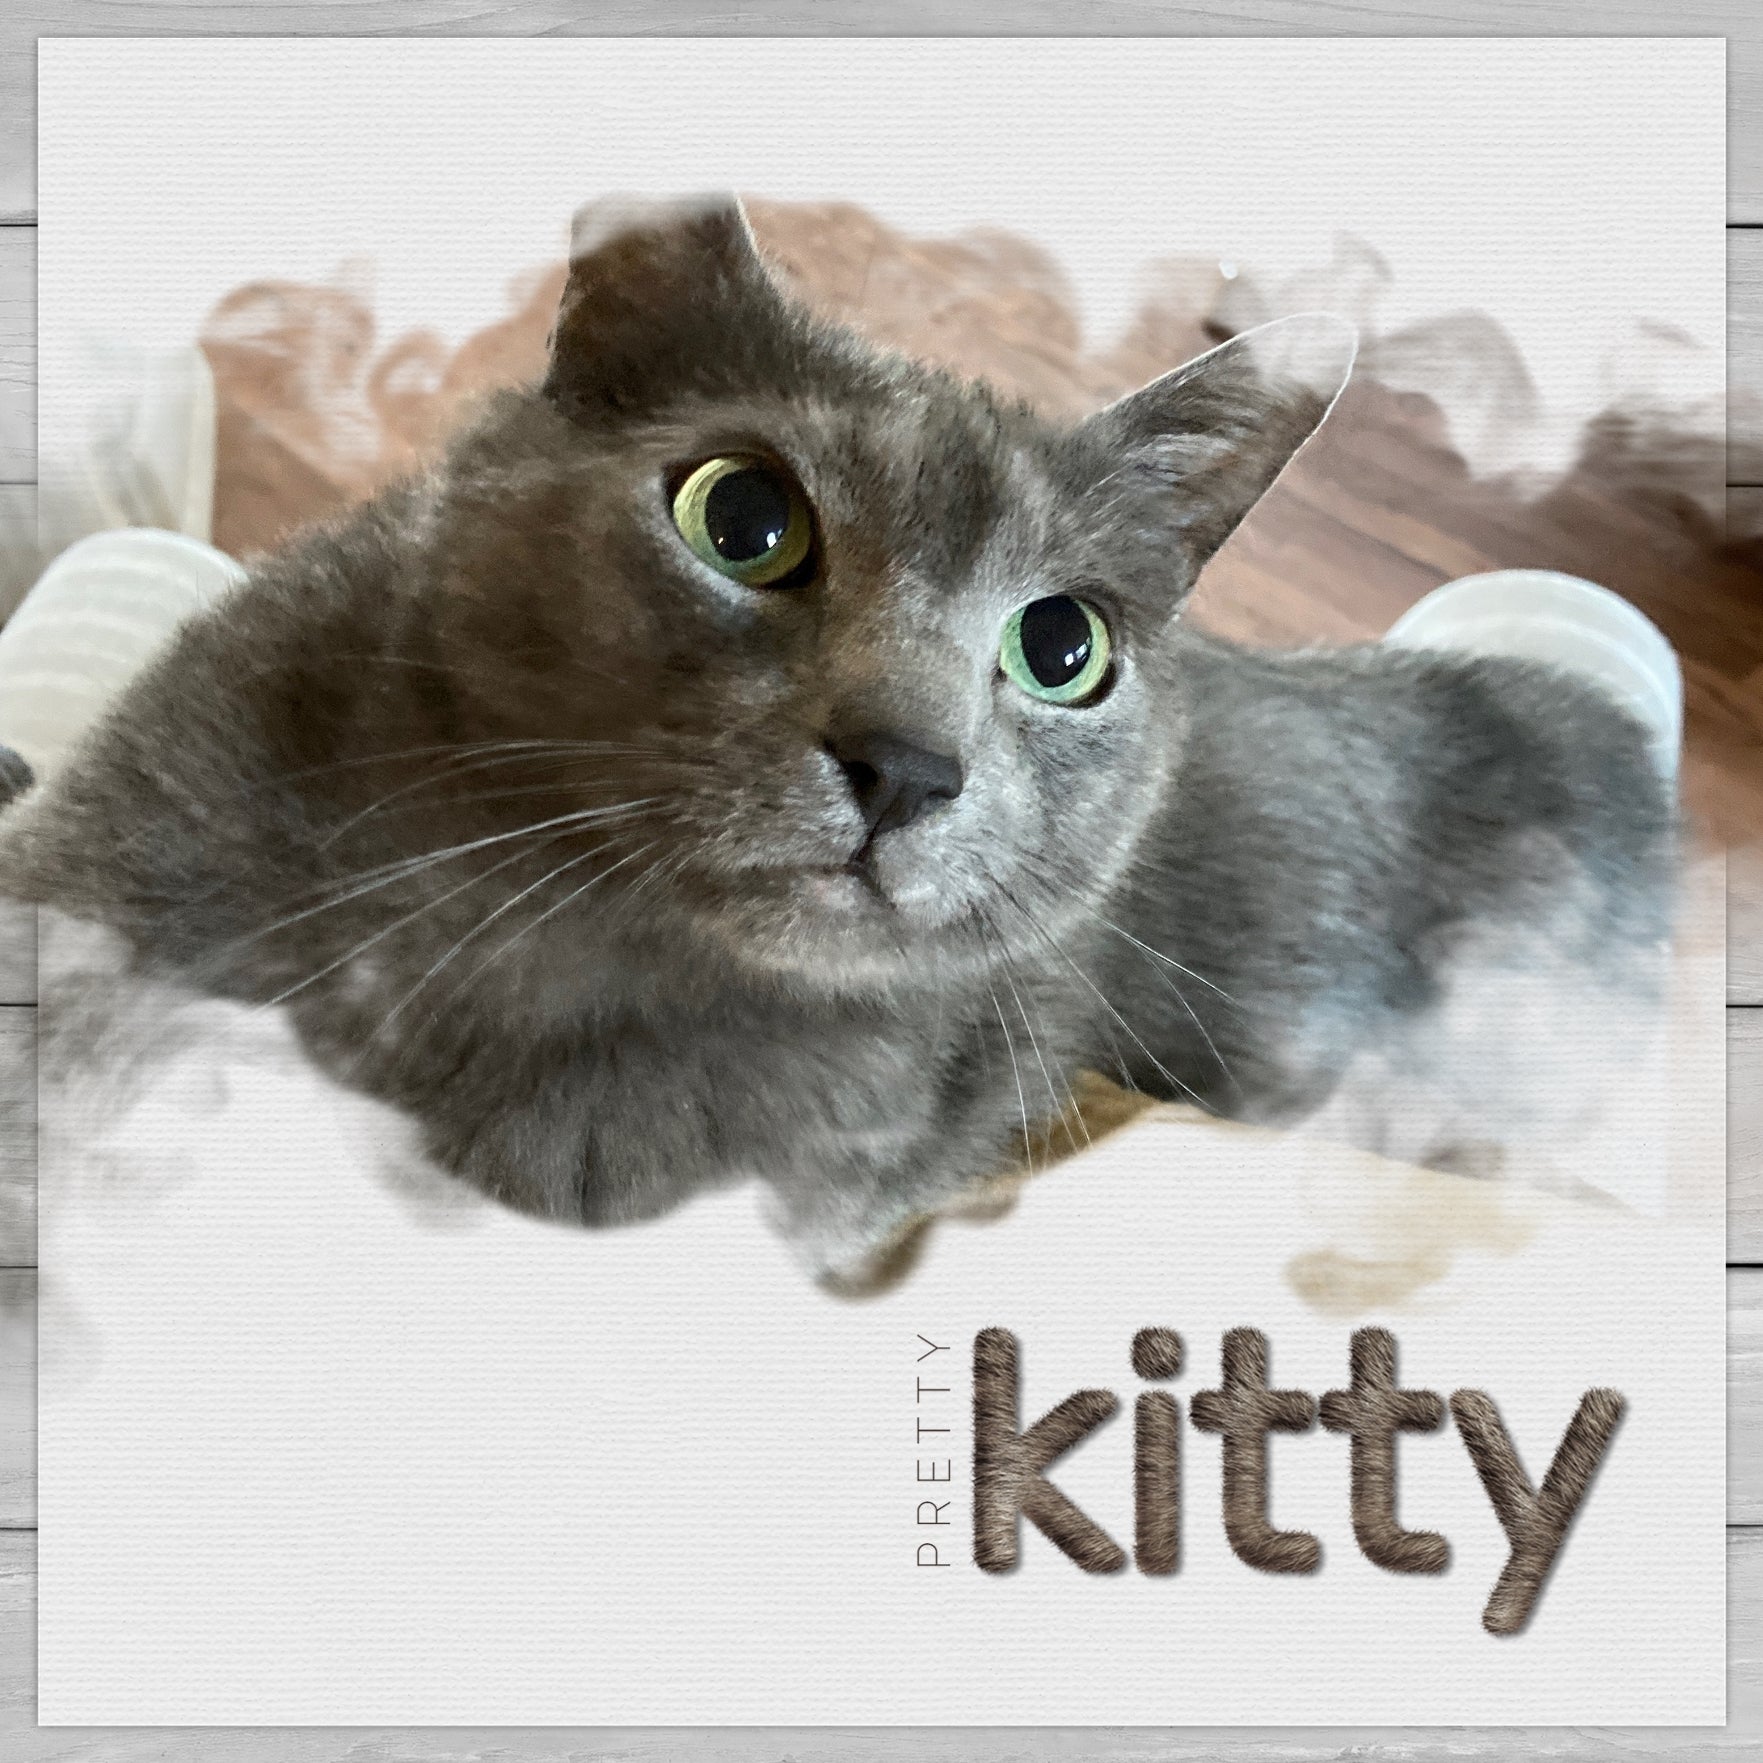 Have fun documenting your favorite cats with these photo masks by Lucky Girl Creative that go edge to edge to your page for a dramatic cloud effect. Not only are these digital art masks great for your pets but they are great for everyday occasions, too!